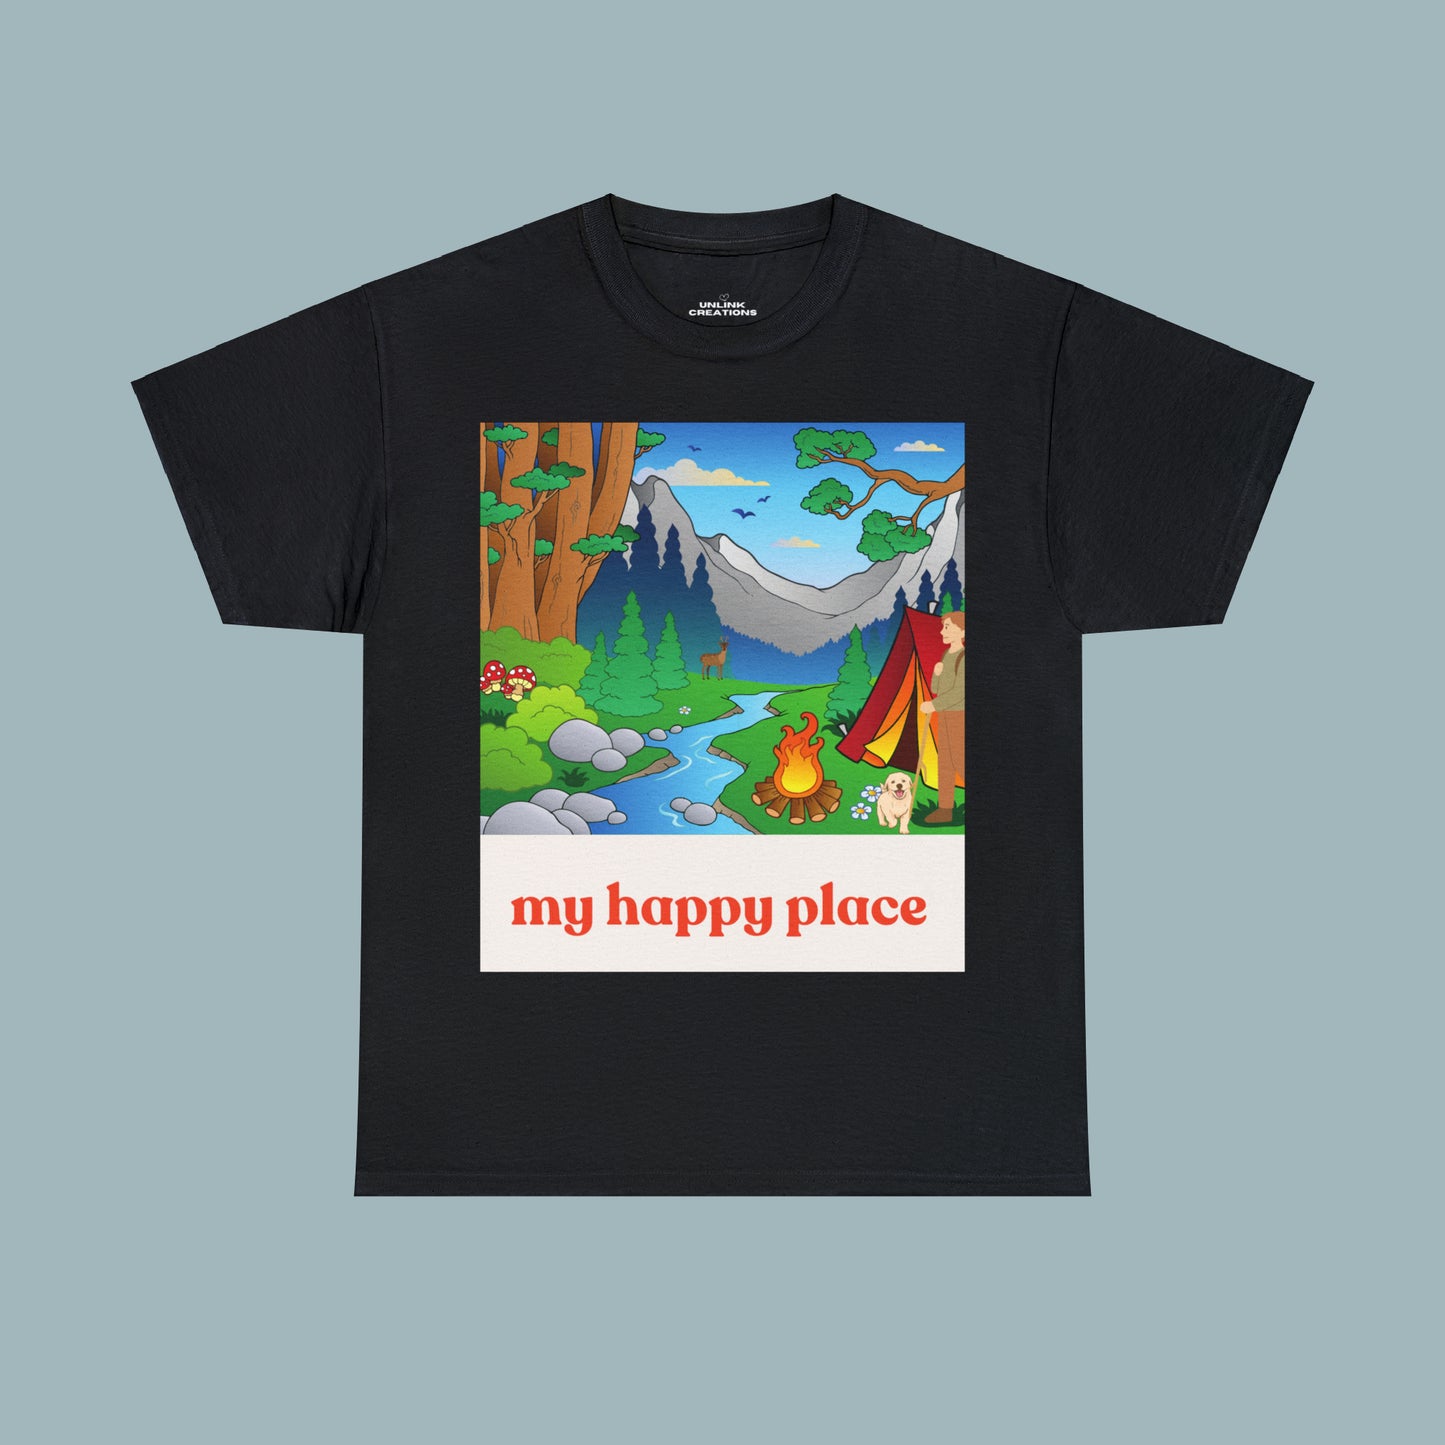 A great shirt for those who love camping in the great outdoors! This Unisex Heavy Cotton Tee is designed to inspire us to spend more time being happy in the great outdoors. Camp, hike and be one with nature.